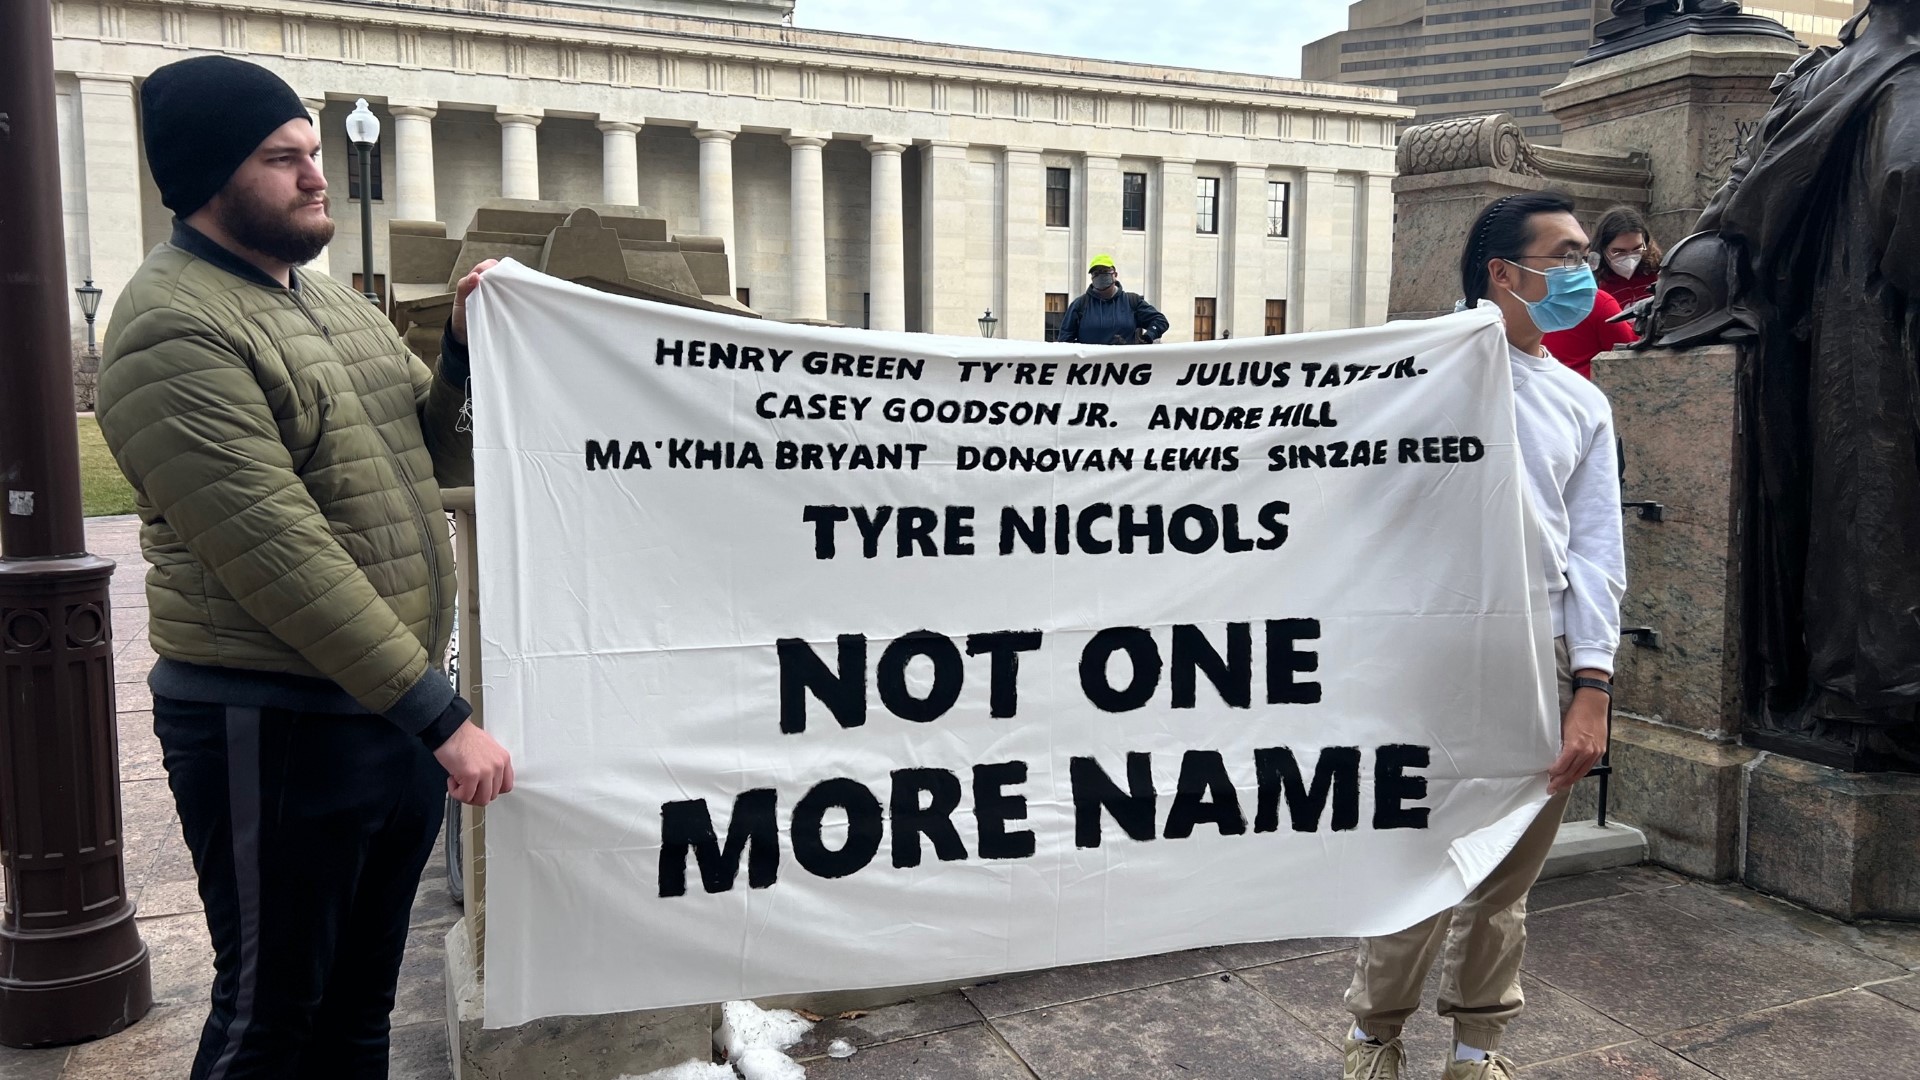 The Party for Socialism and Liberation announced Ohio's "Justice for Tyre" rally, as well as rallies across the country, on Twitter Friday night.